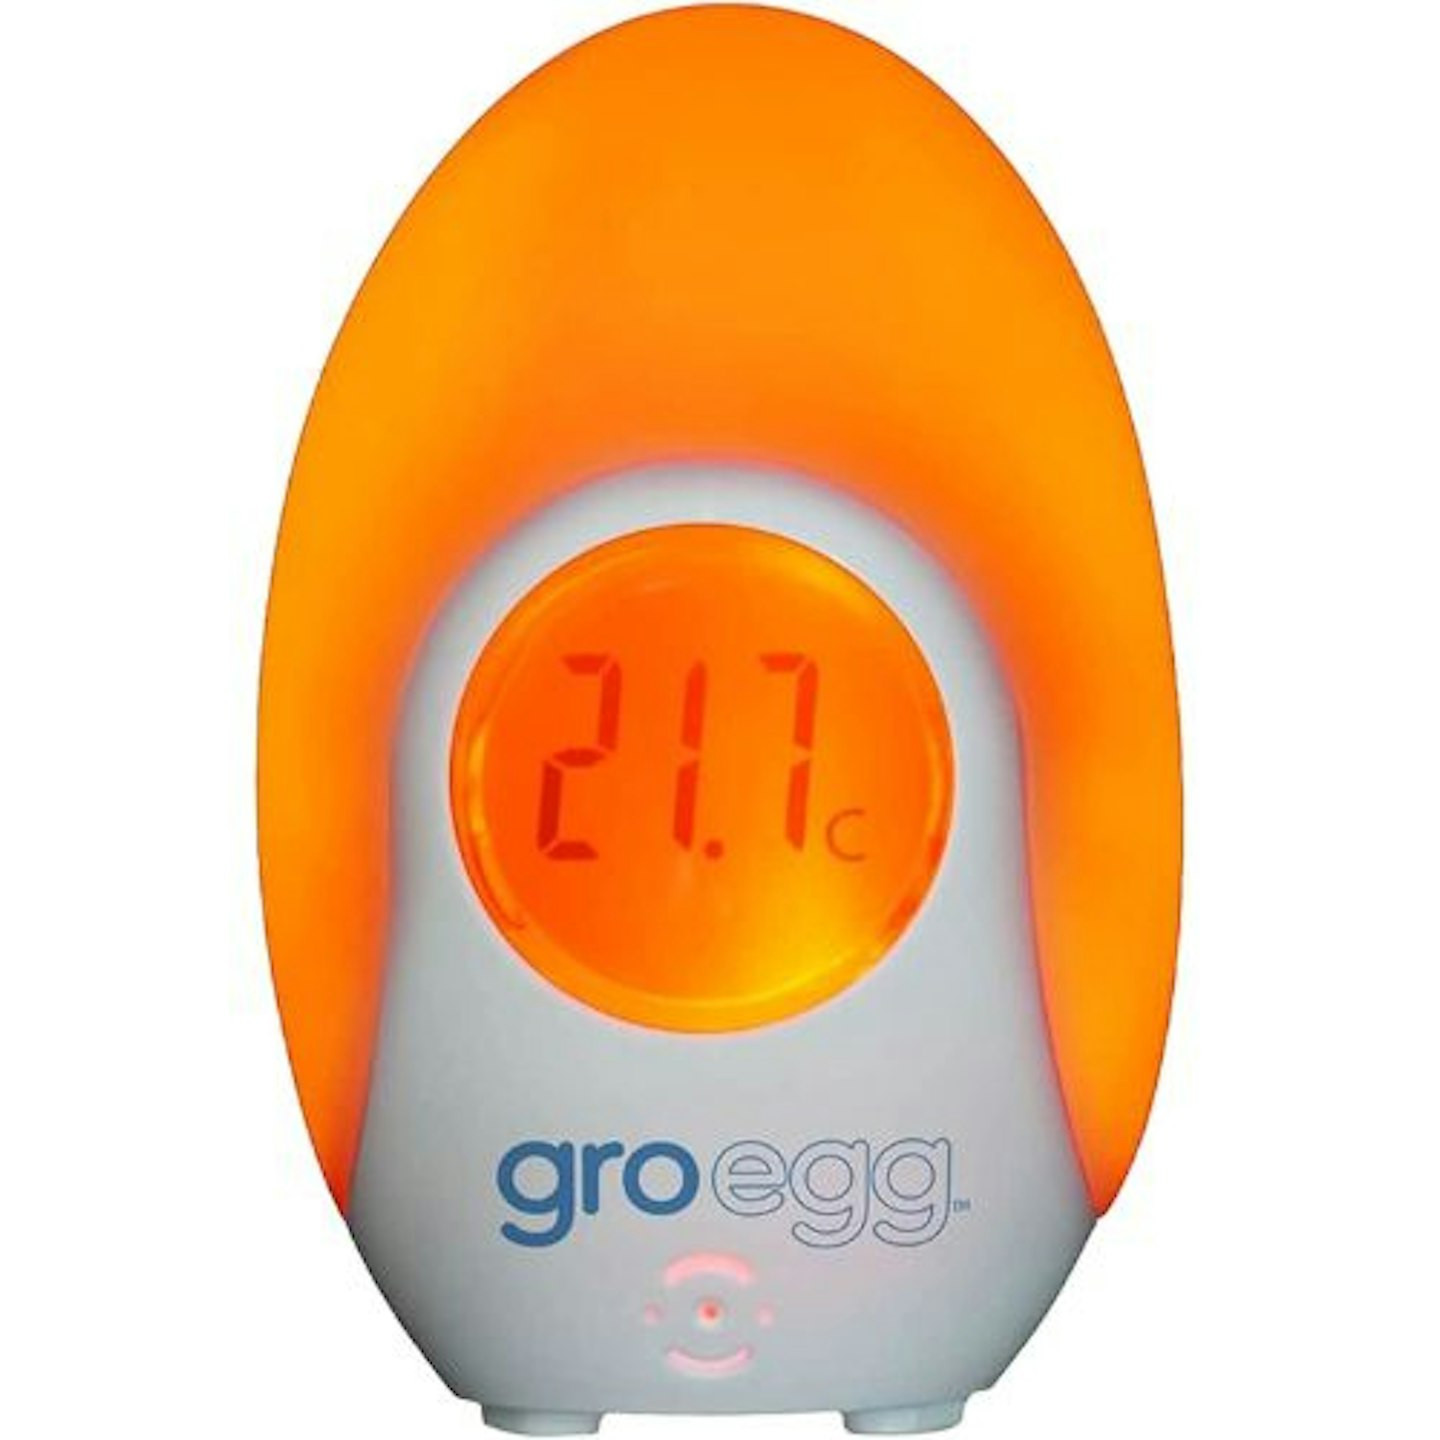 5 Best Baby Room Thermometers of 2023